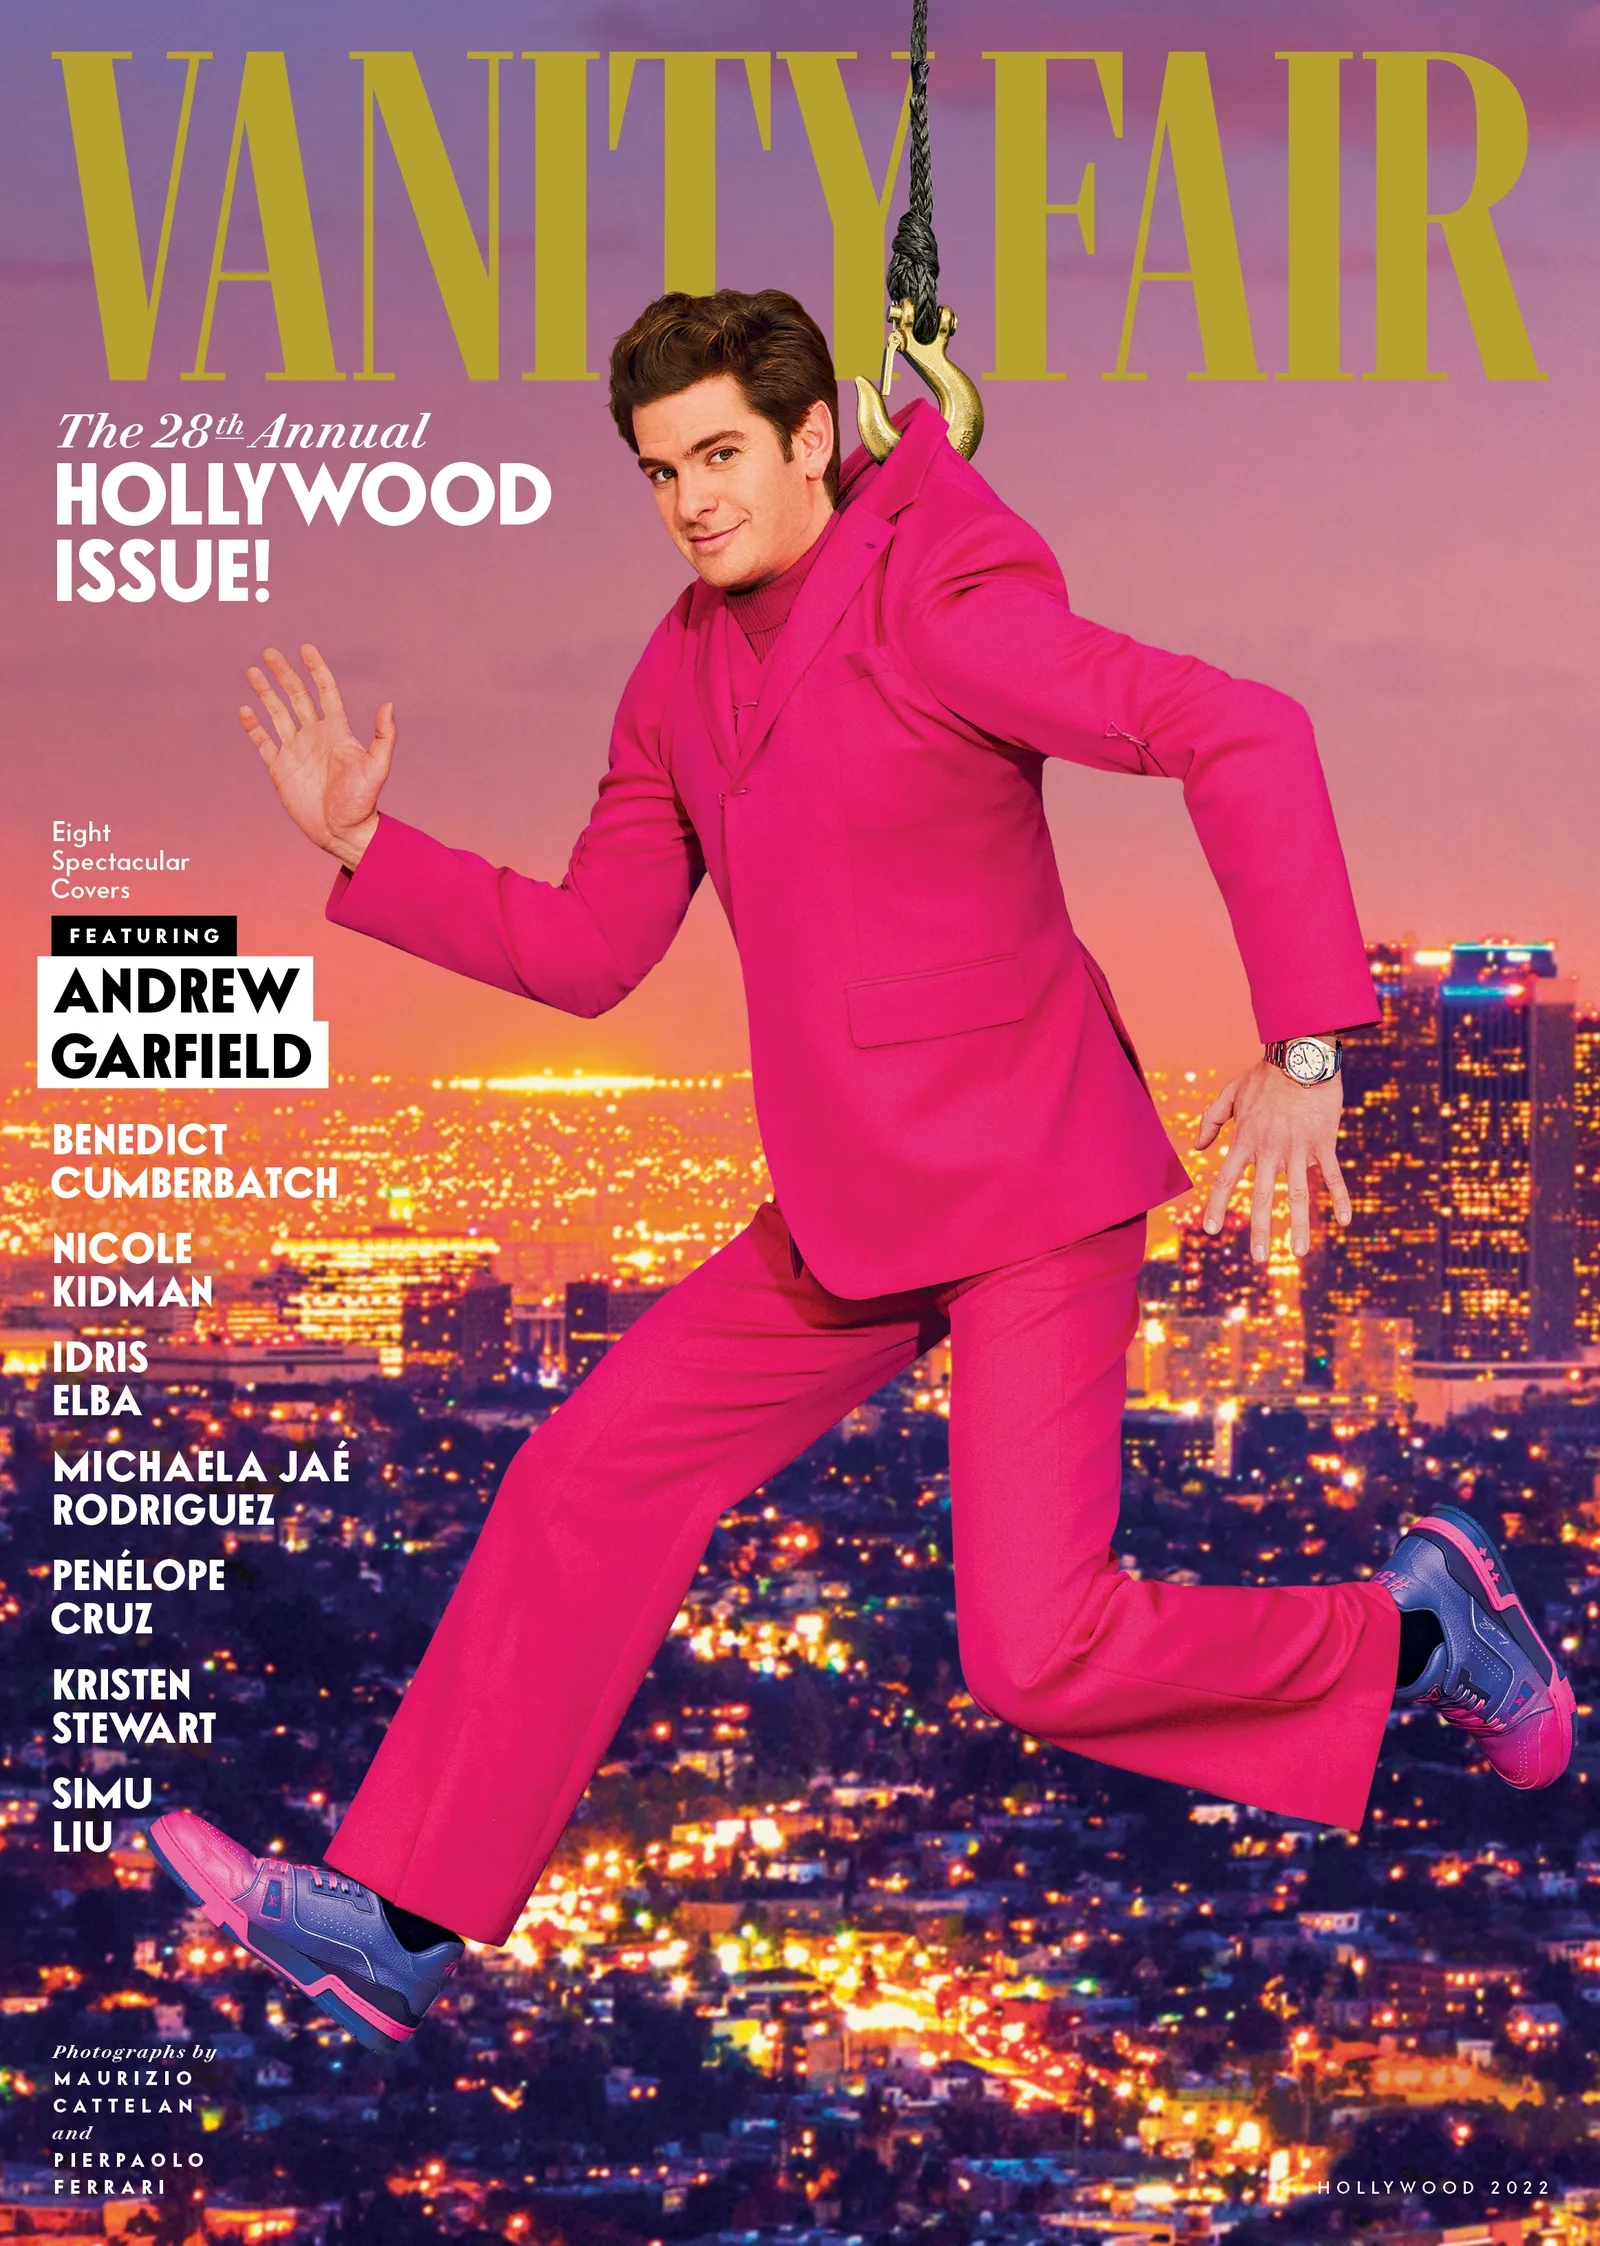 Andrew Garfield for Vanity Fair (Hollywood Issue 2022) - Andrew Garfield  Photo (44305741) - Fanpop